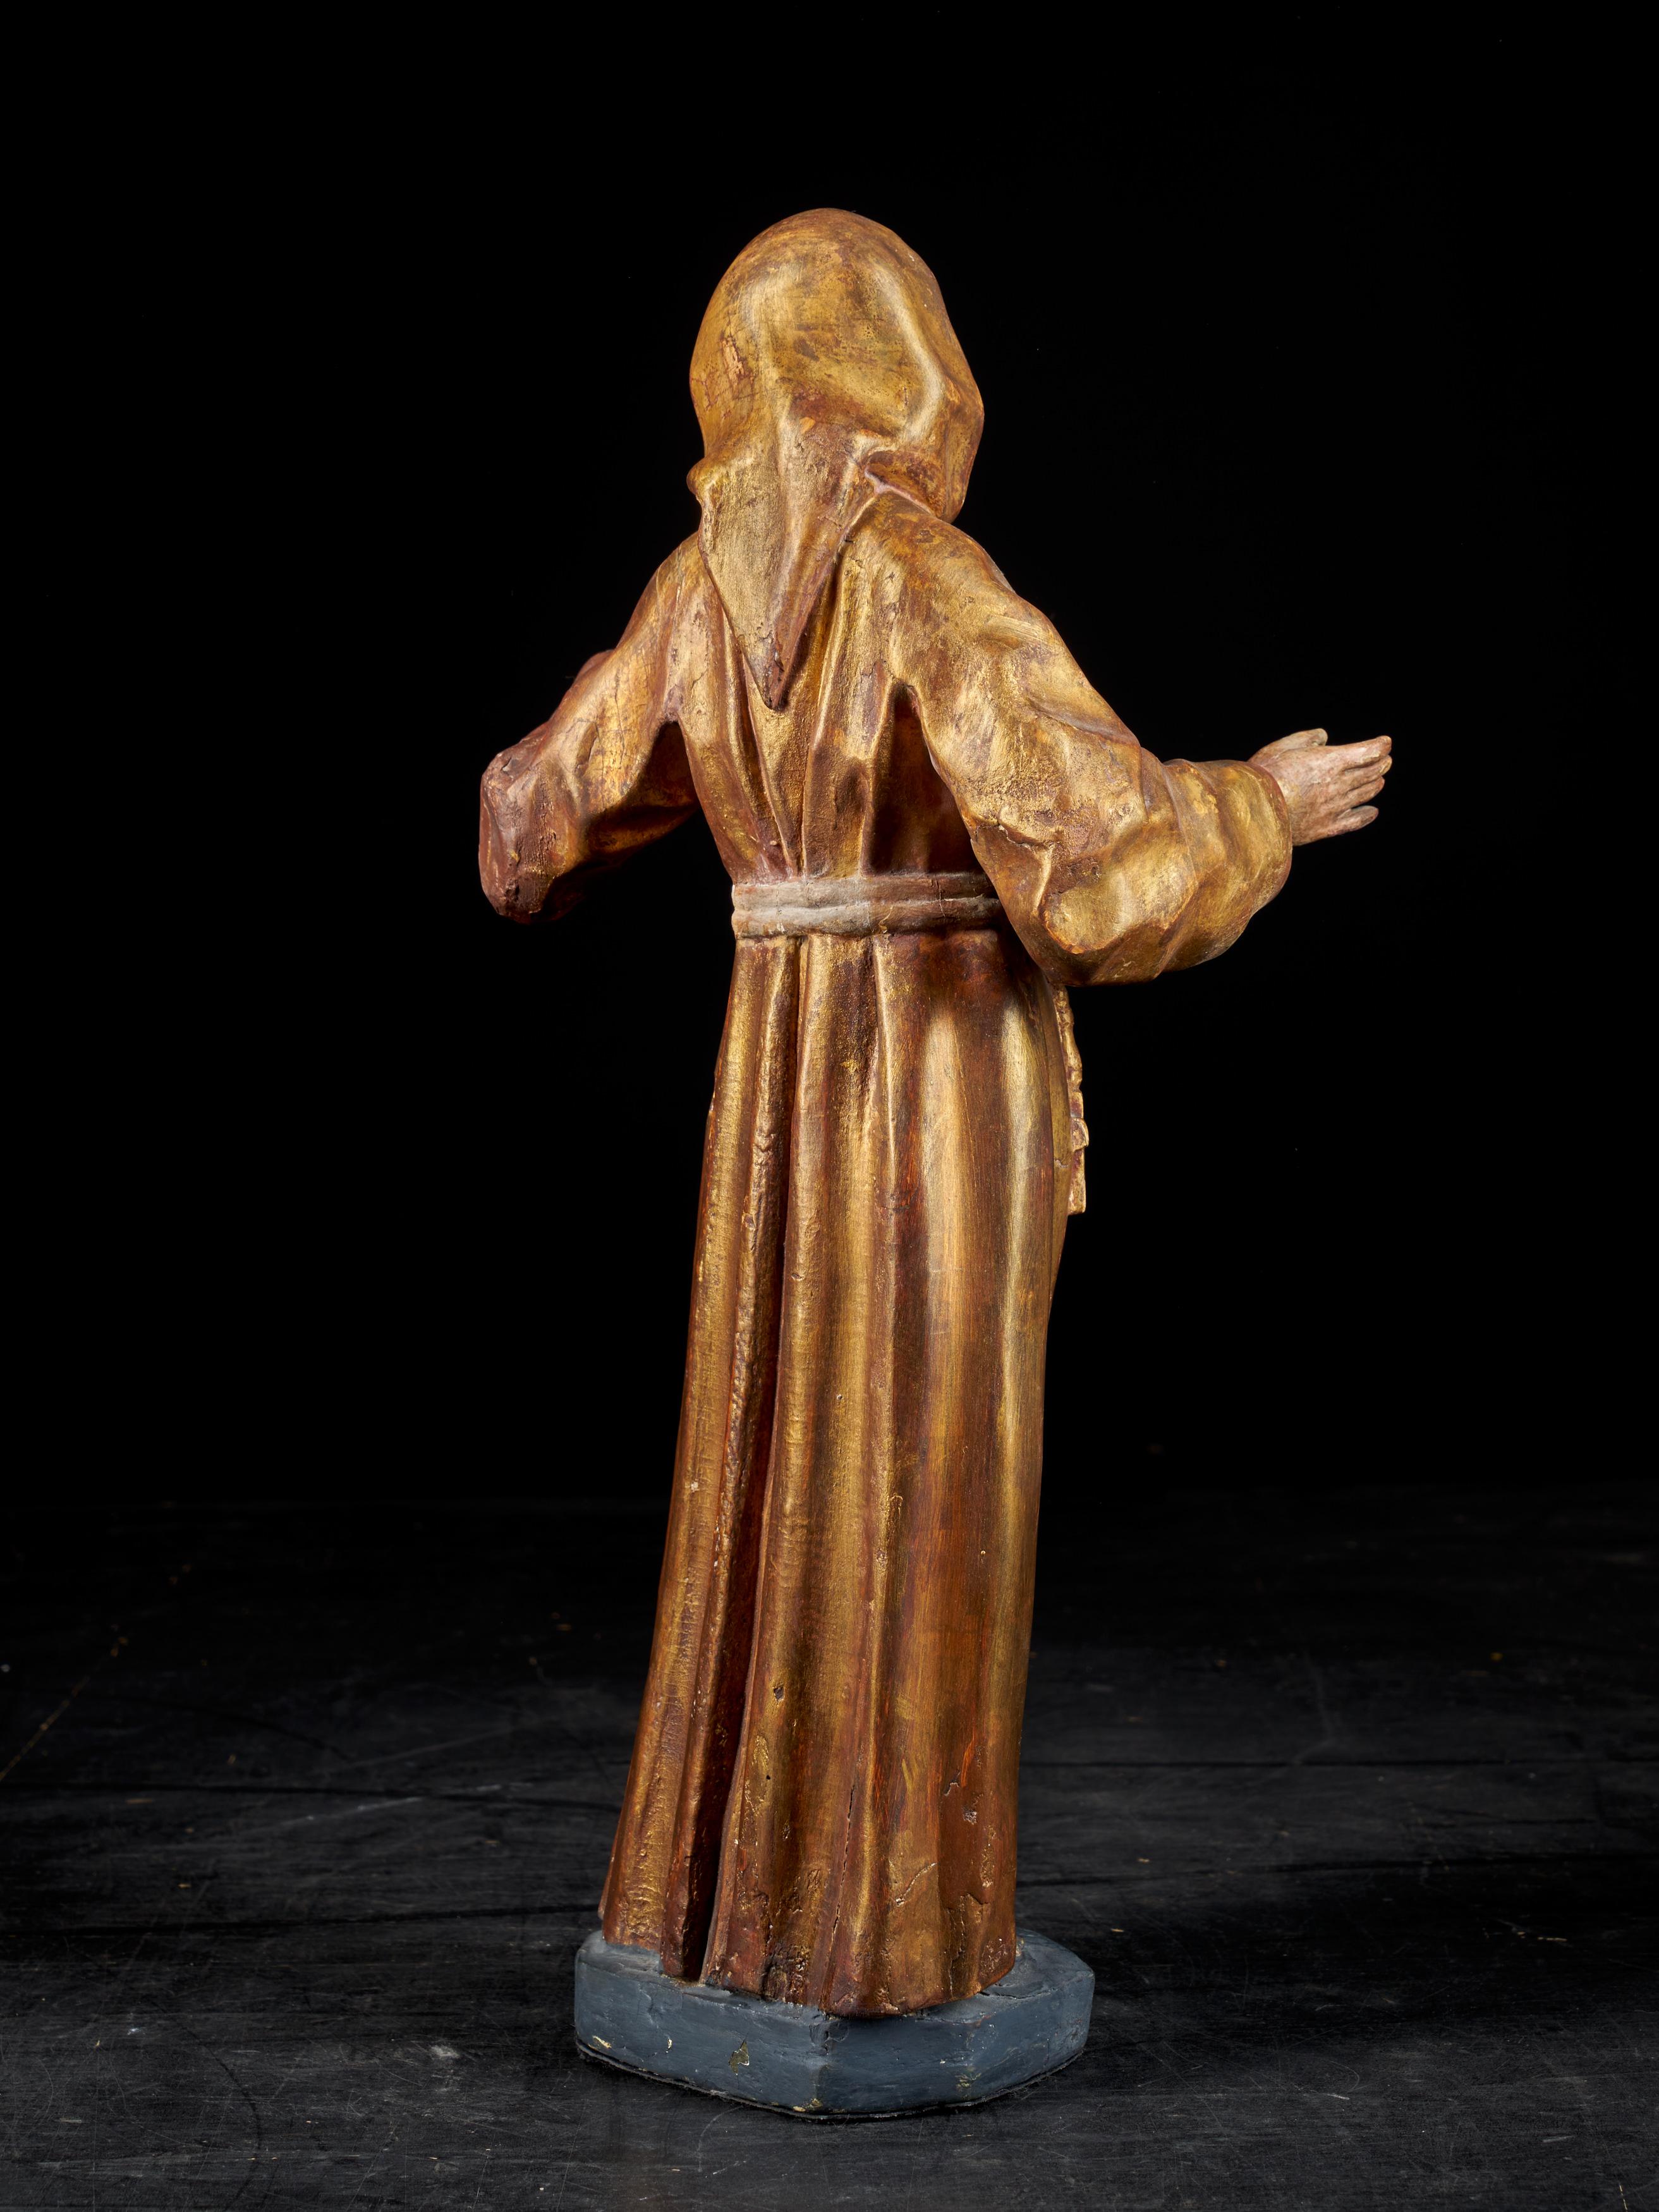 17th Century Wooden Statue of Saint-Francis with the Original Polychromy and Gilding